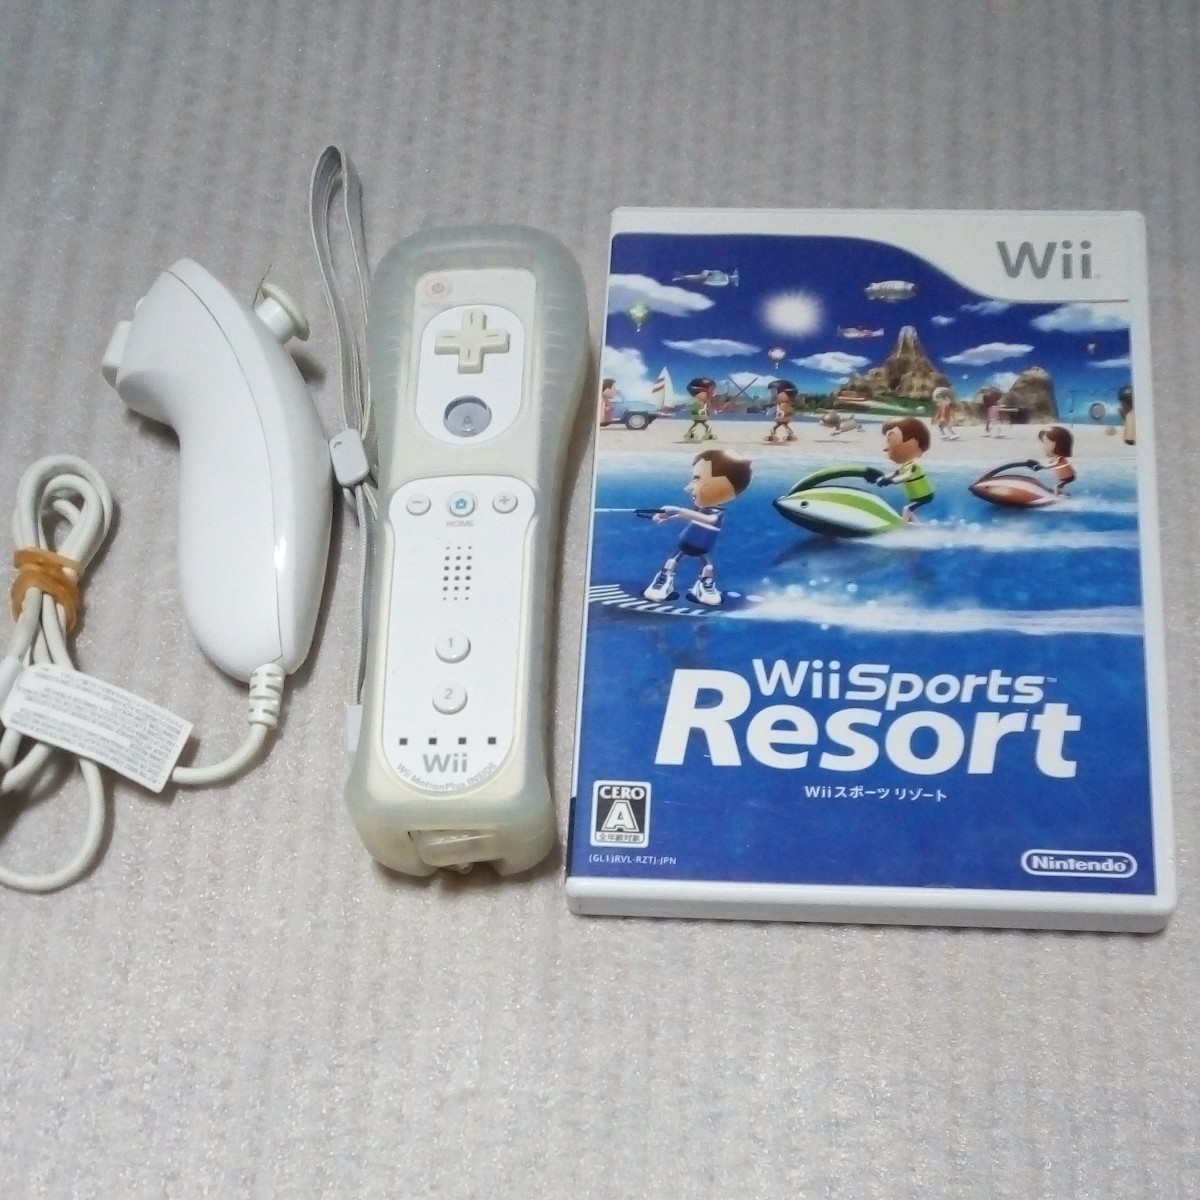 Wiiリモコンプラス　ヌンチャク　Wiiソフト　Wiiスポーツリゾート